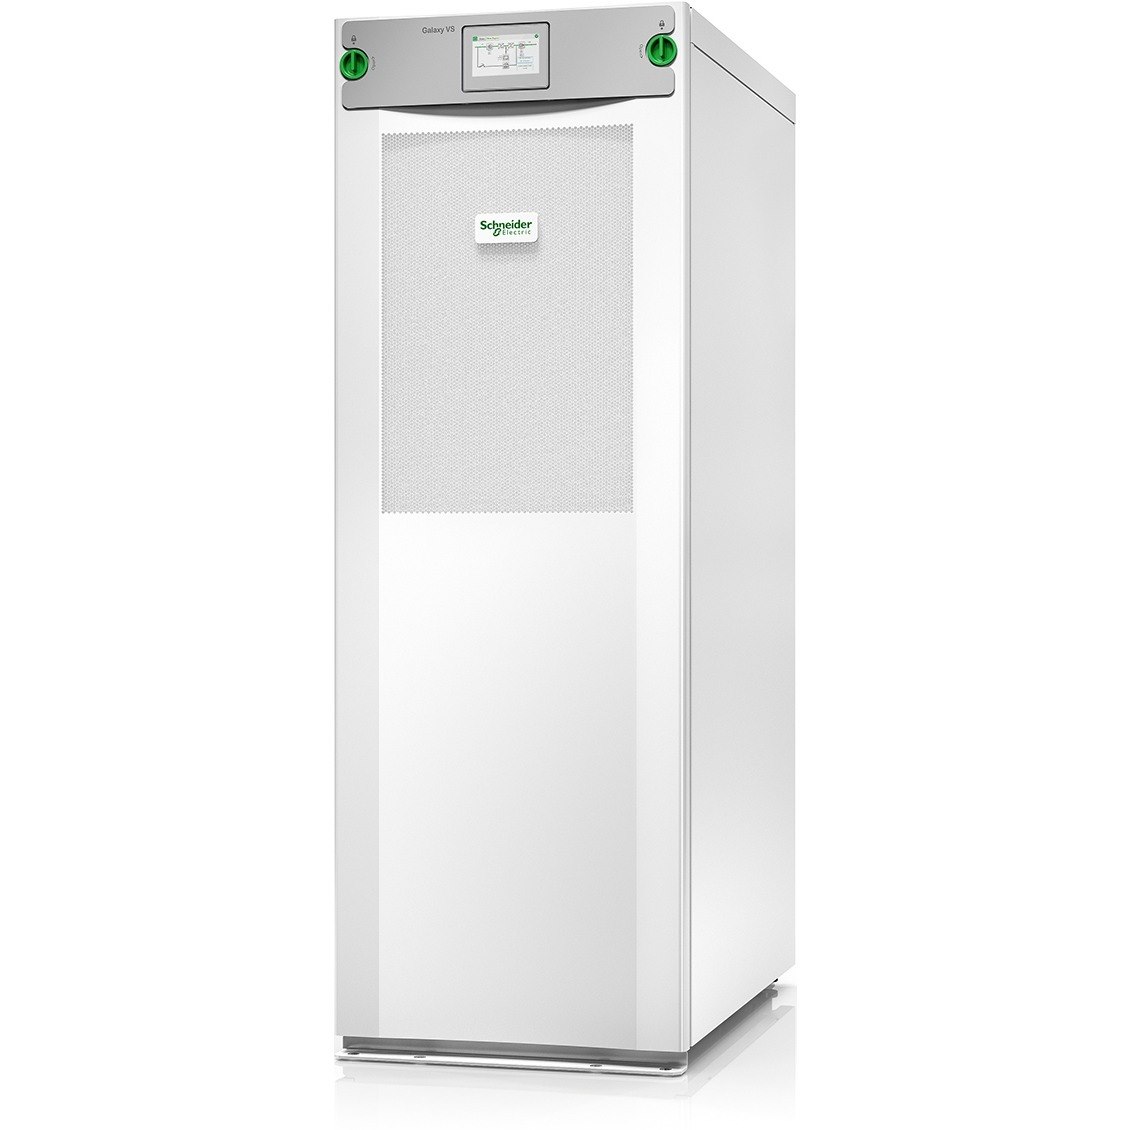 APC by Schneider Electric Galaxy VS Double Conversion Online UPS - 40 kVA - Three Phase